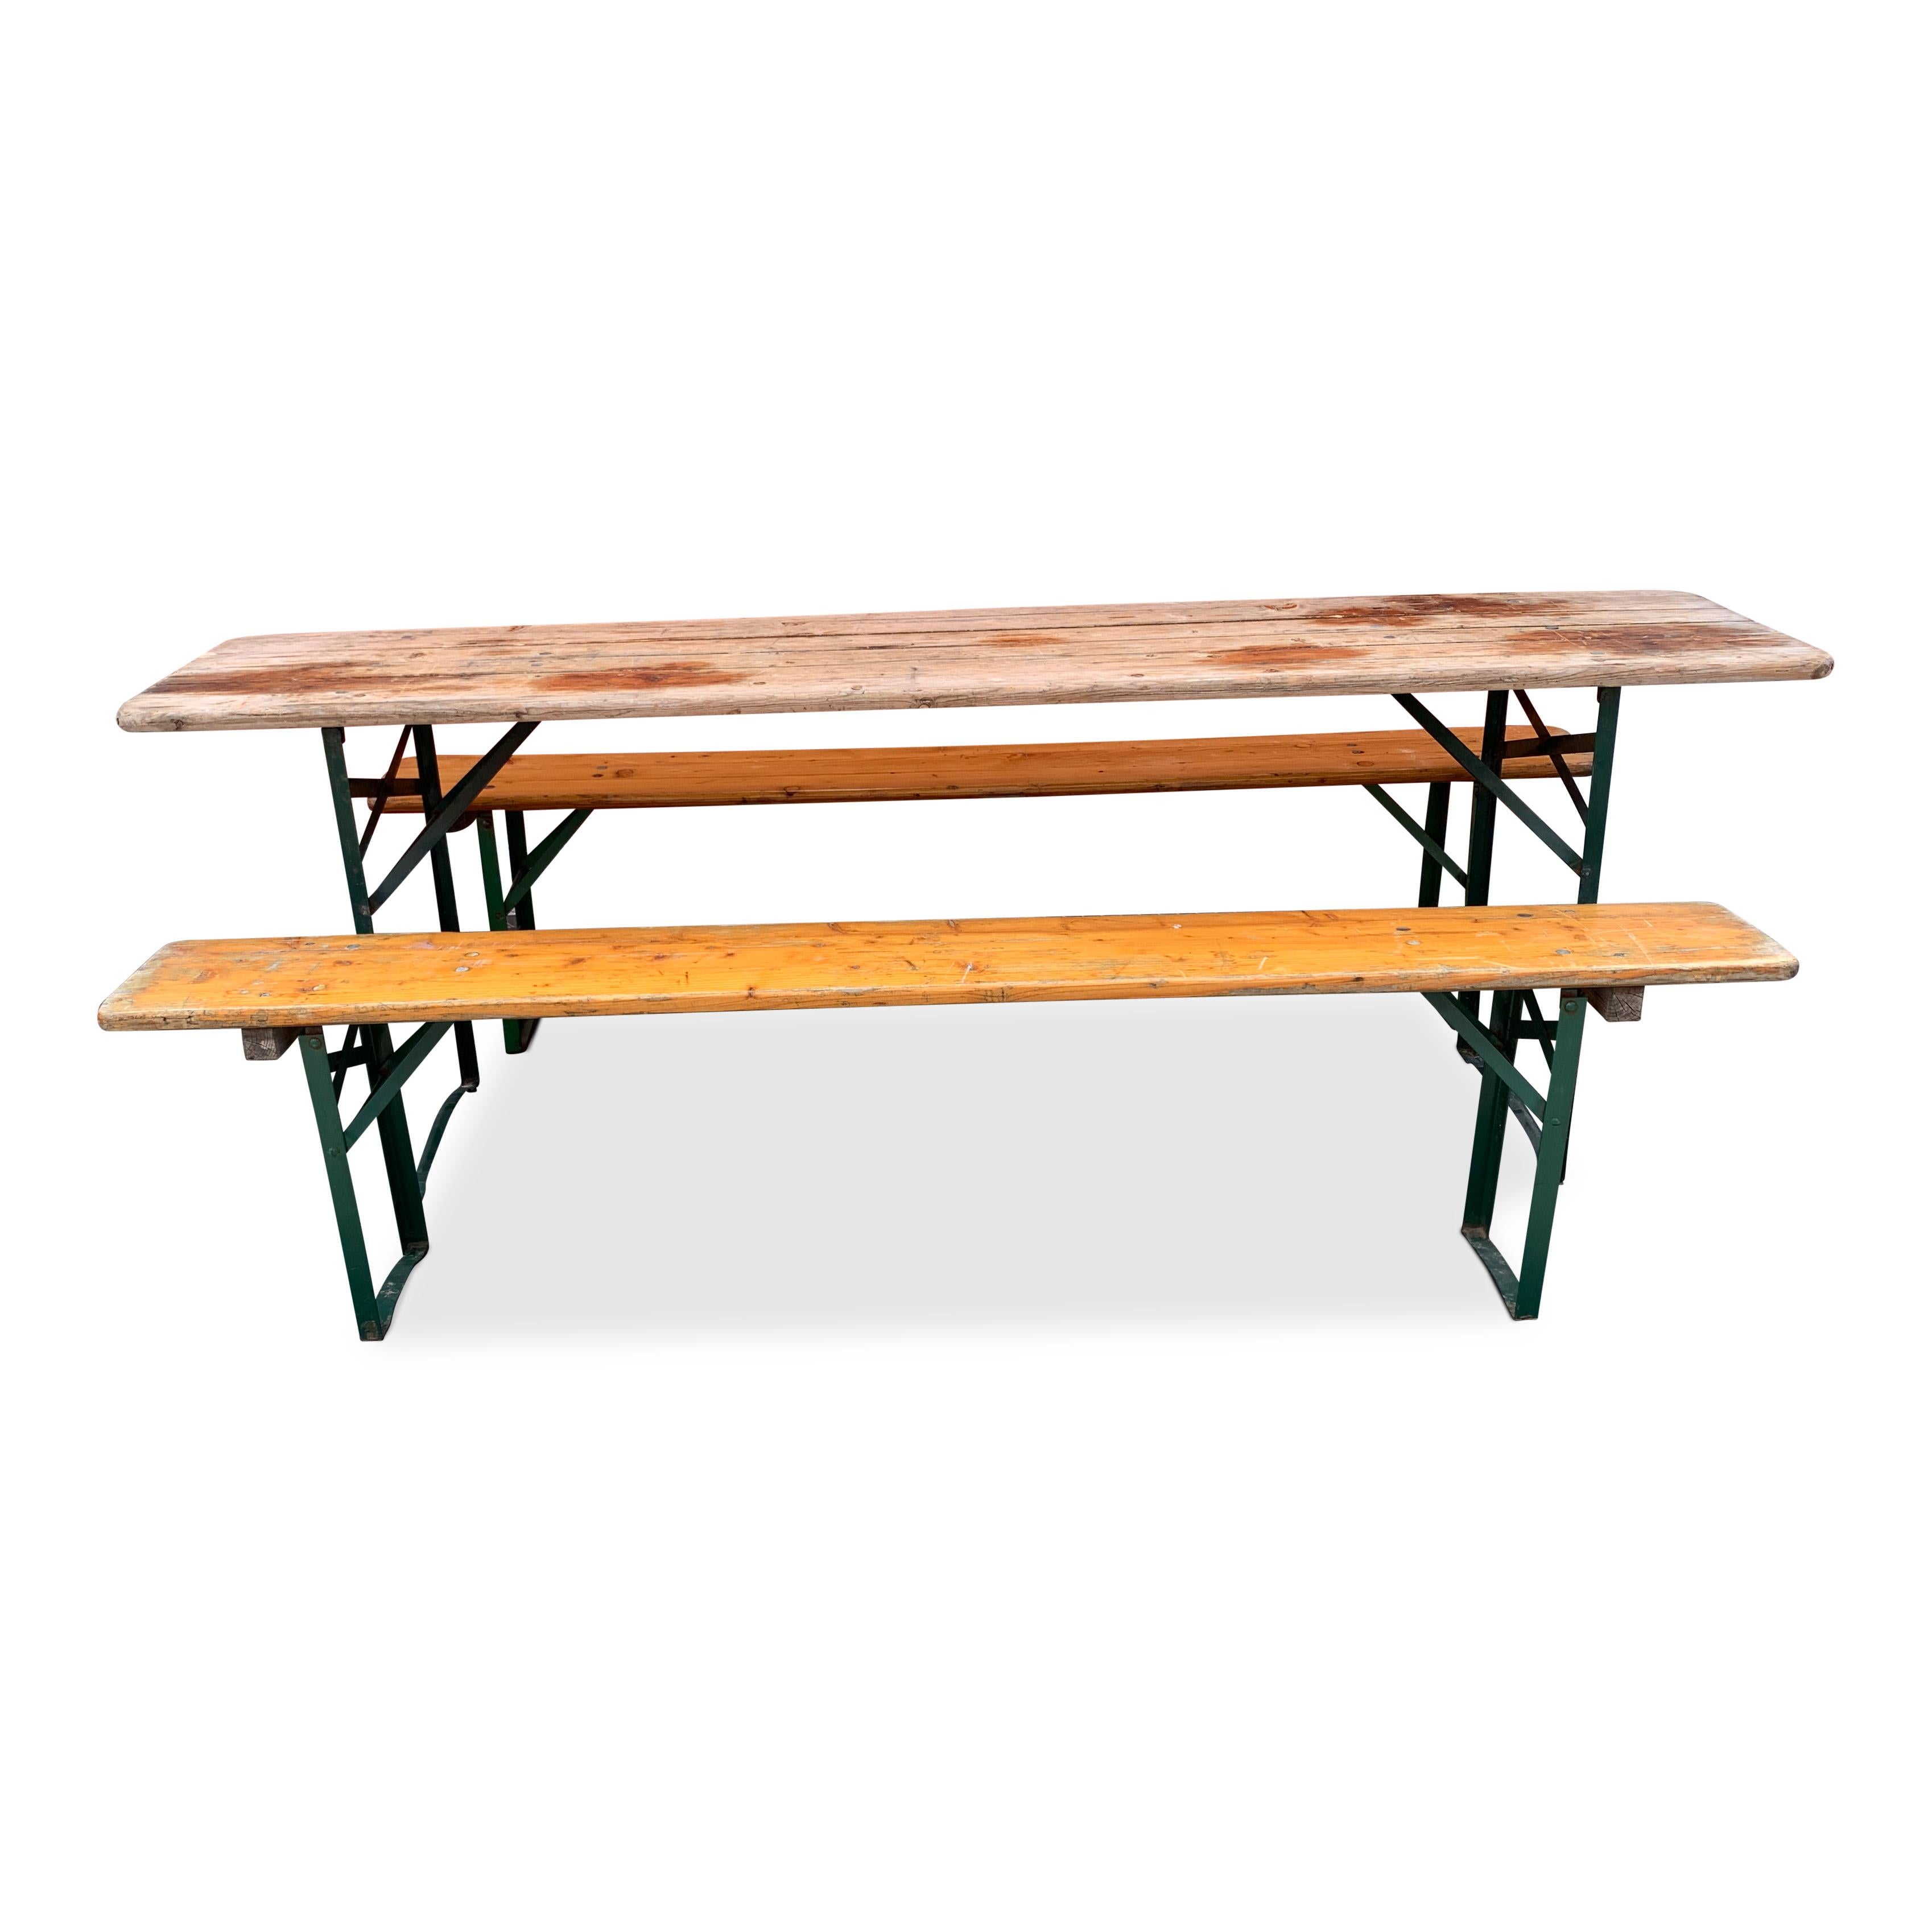 For the beer lovers! Or for those that appreciate hosting a great outdoor BBQ. This amazing Biergarten table with accompanied bench stools will become a main staple for those that enjoy the simplicity of outdoors. 

Both table and benches are